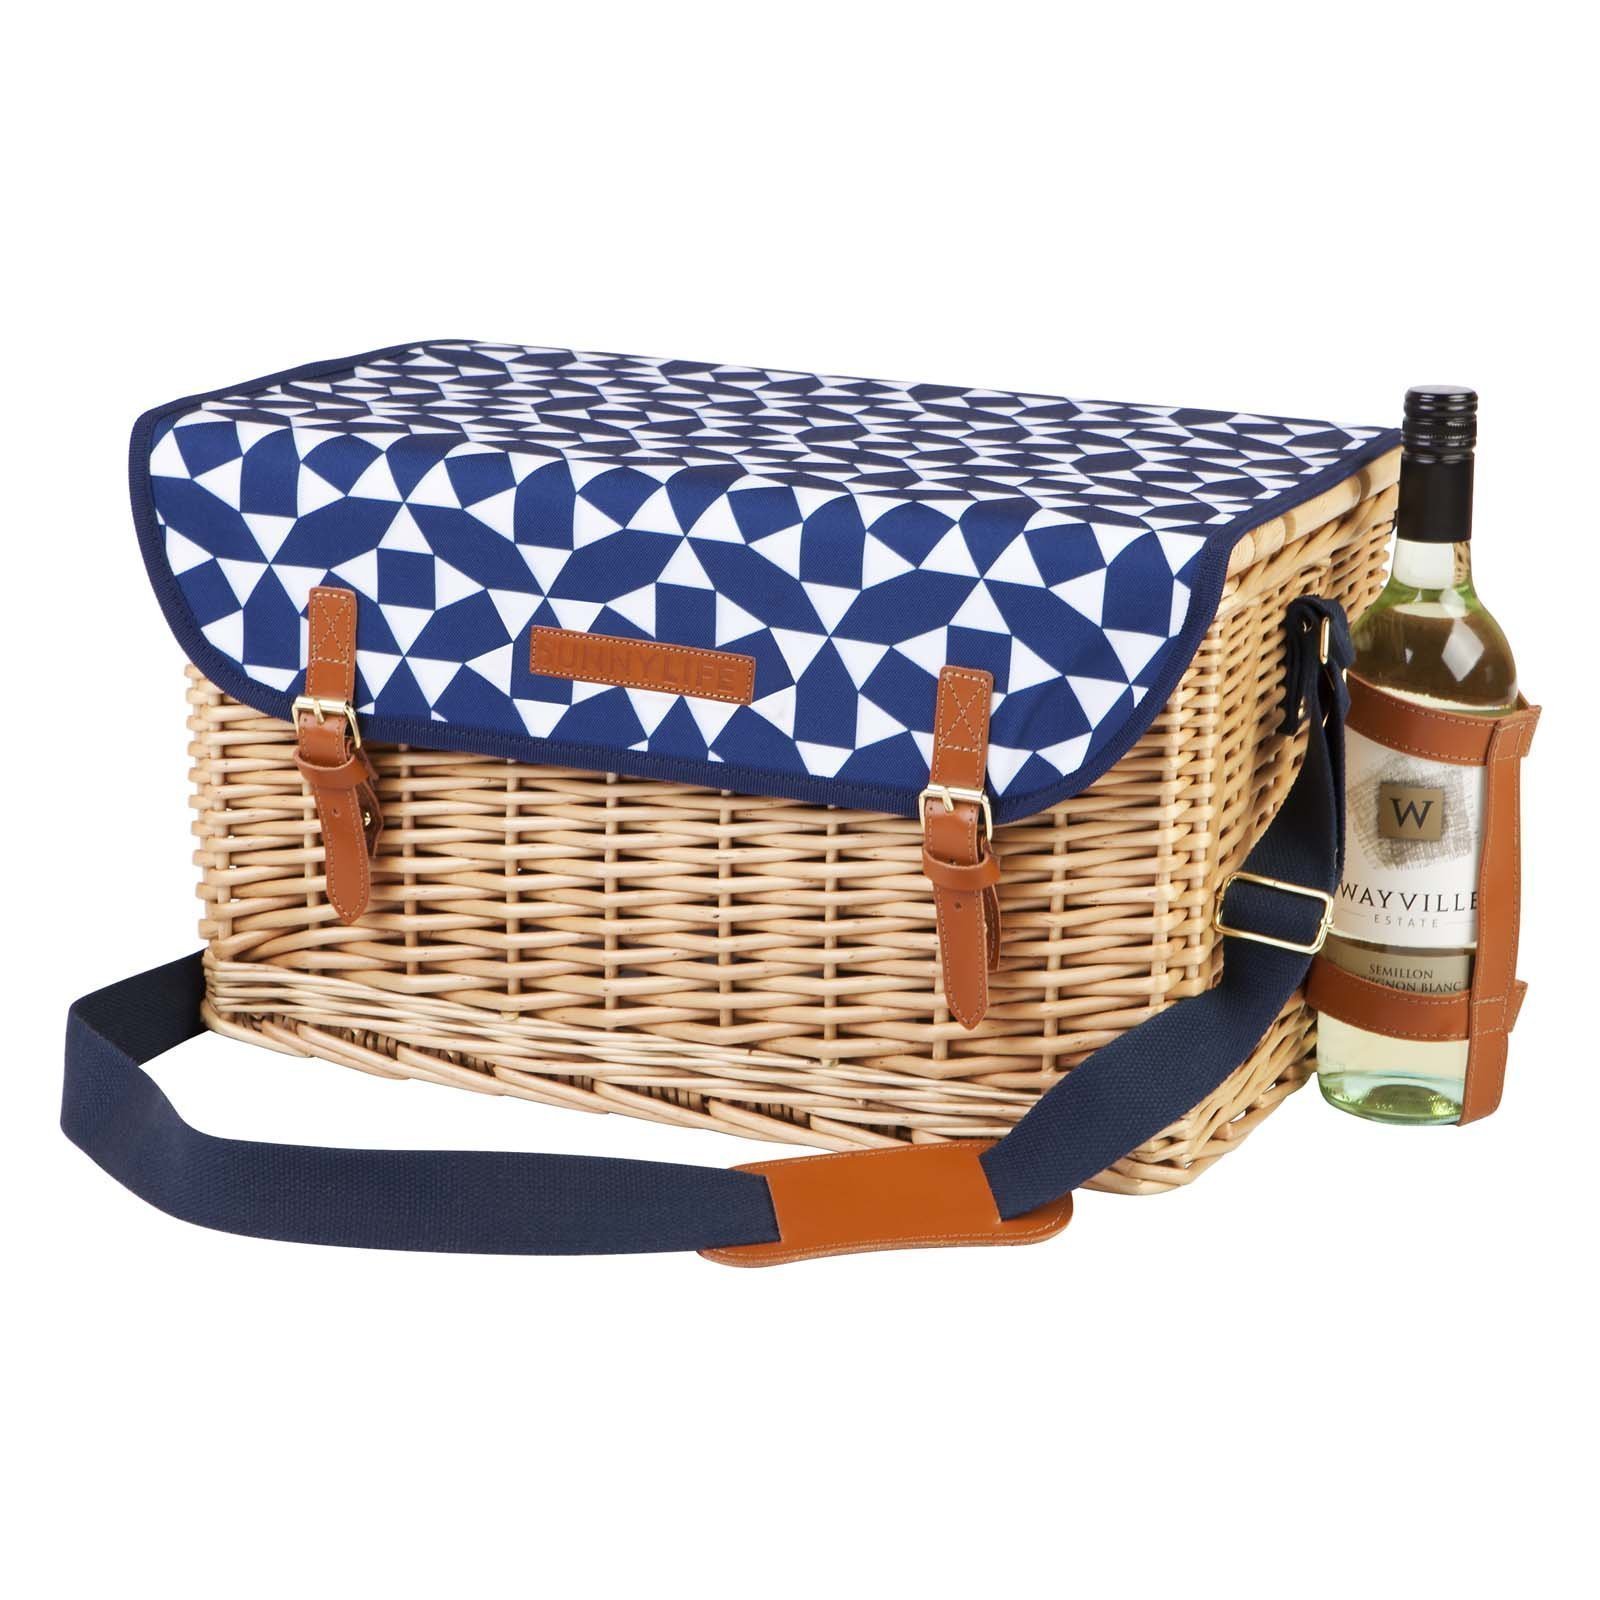 picnic basket with blue and white cover